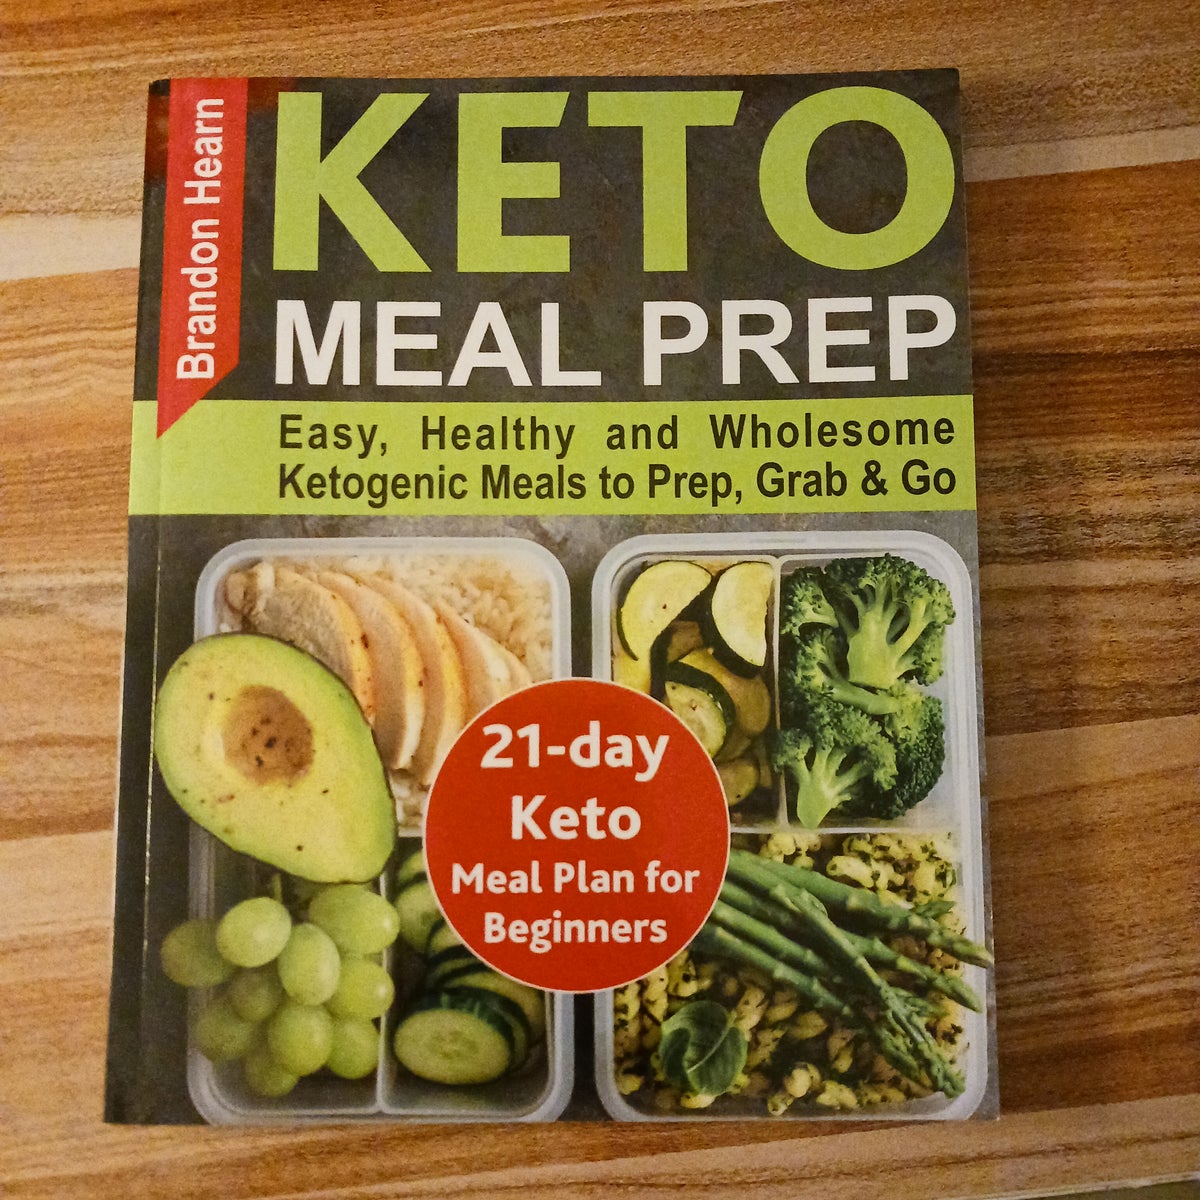 Keto Meal Prep : Essential Ketogenic Diet Meal Prep Guide For Beginners -  30 Day Ultra Low Carb Meal Plan to Prep, Grab, and Go (Paperback) 